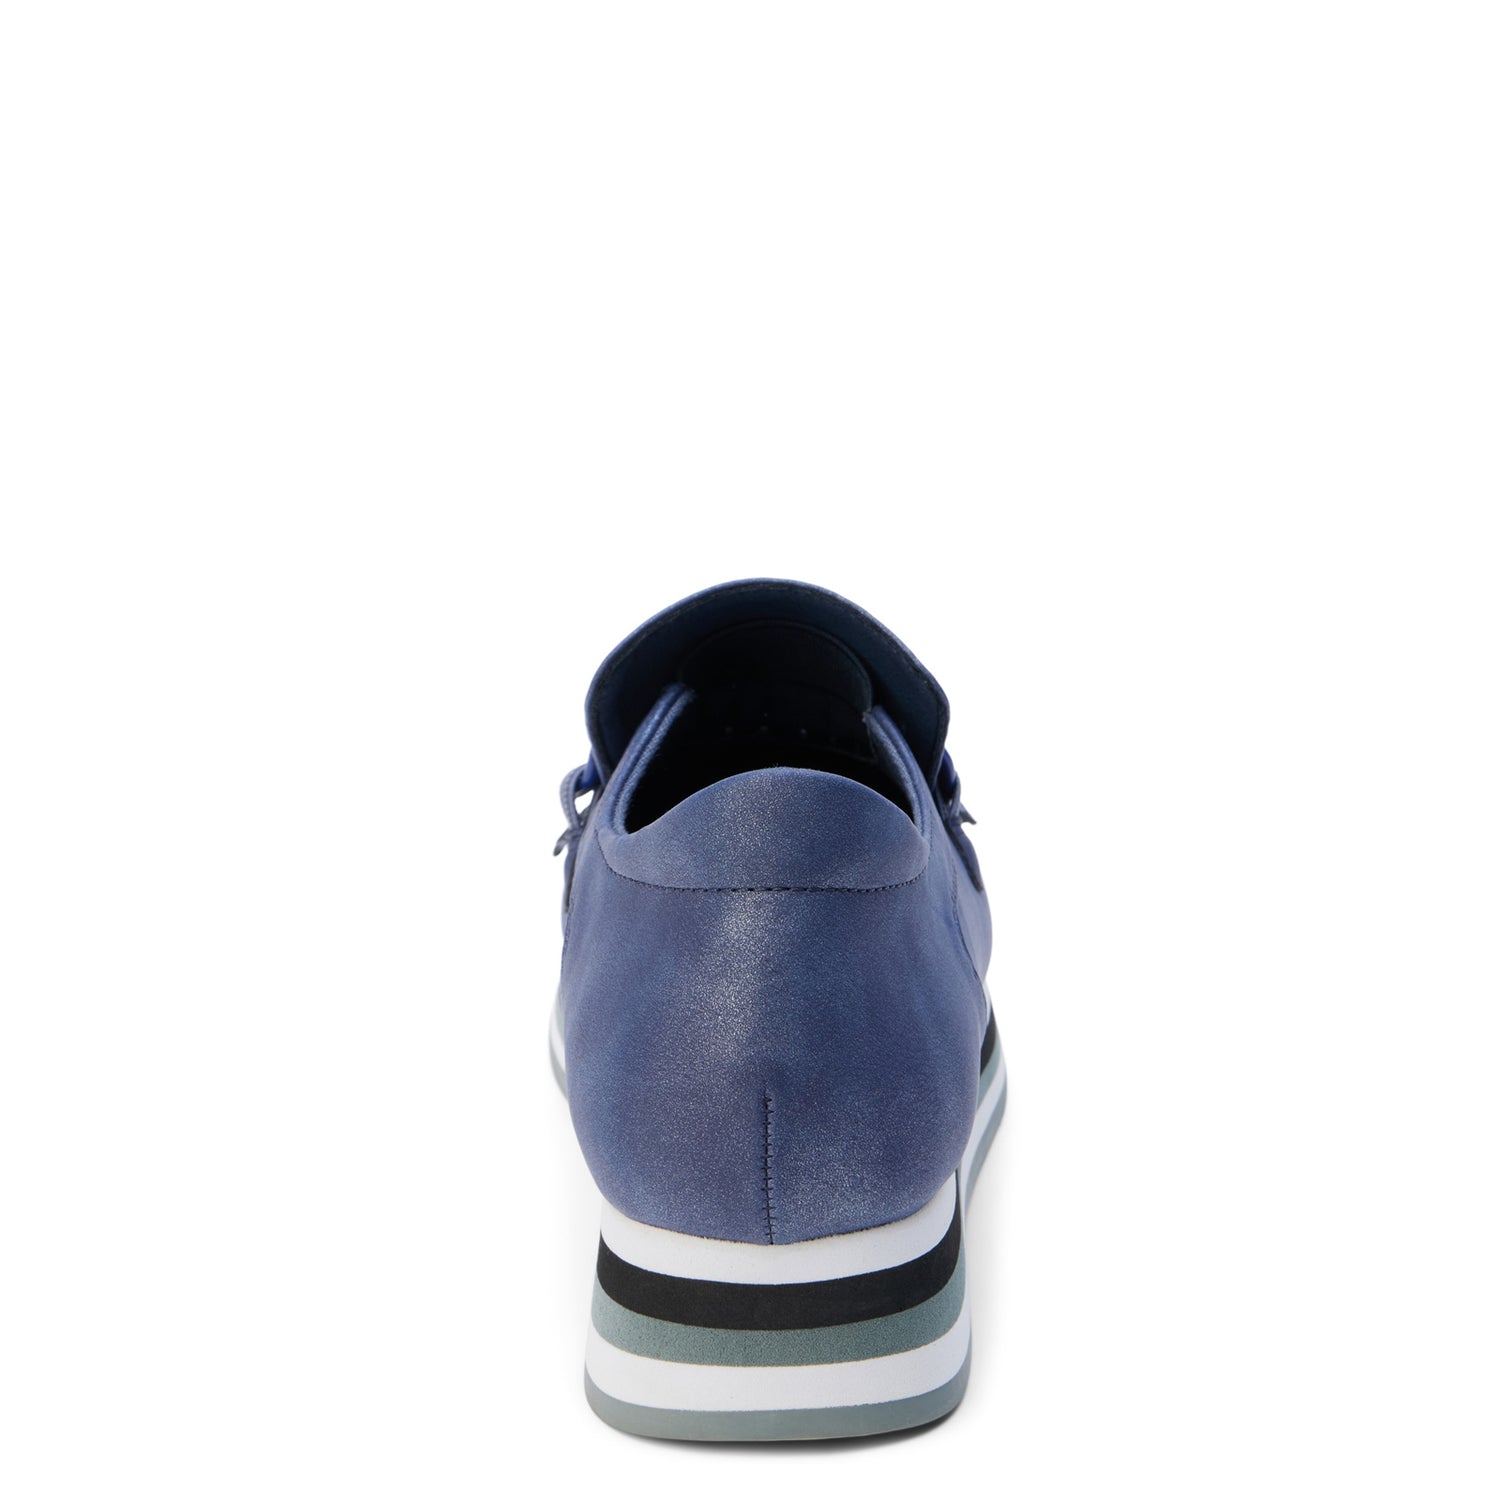 Peltz Shoes  Women's Coconuts by Matisse Bess Loafer NAVY FROST BESS NAVY FROST